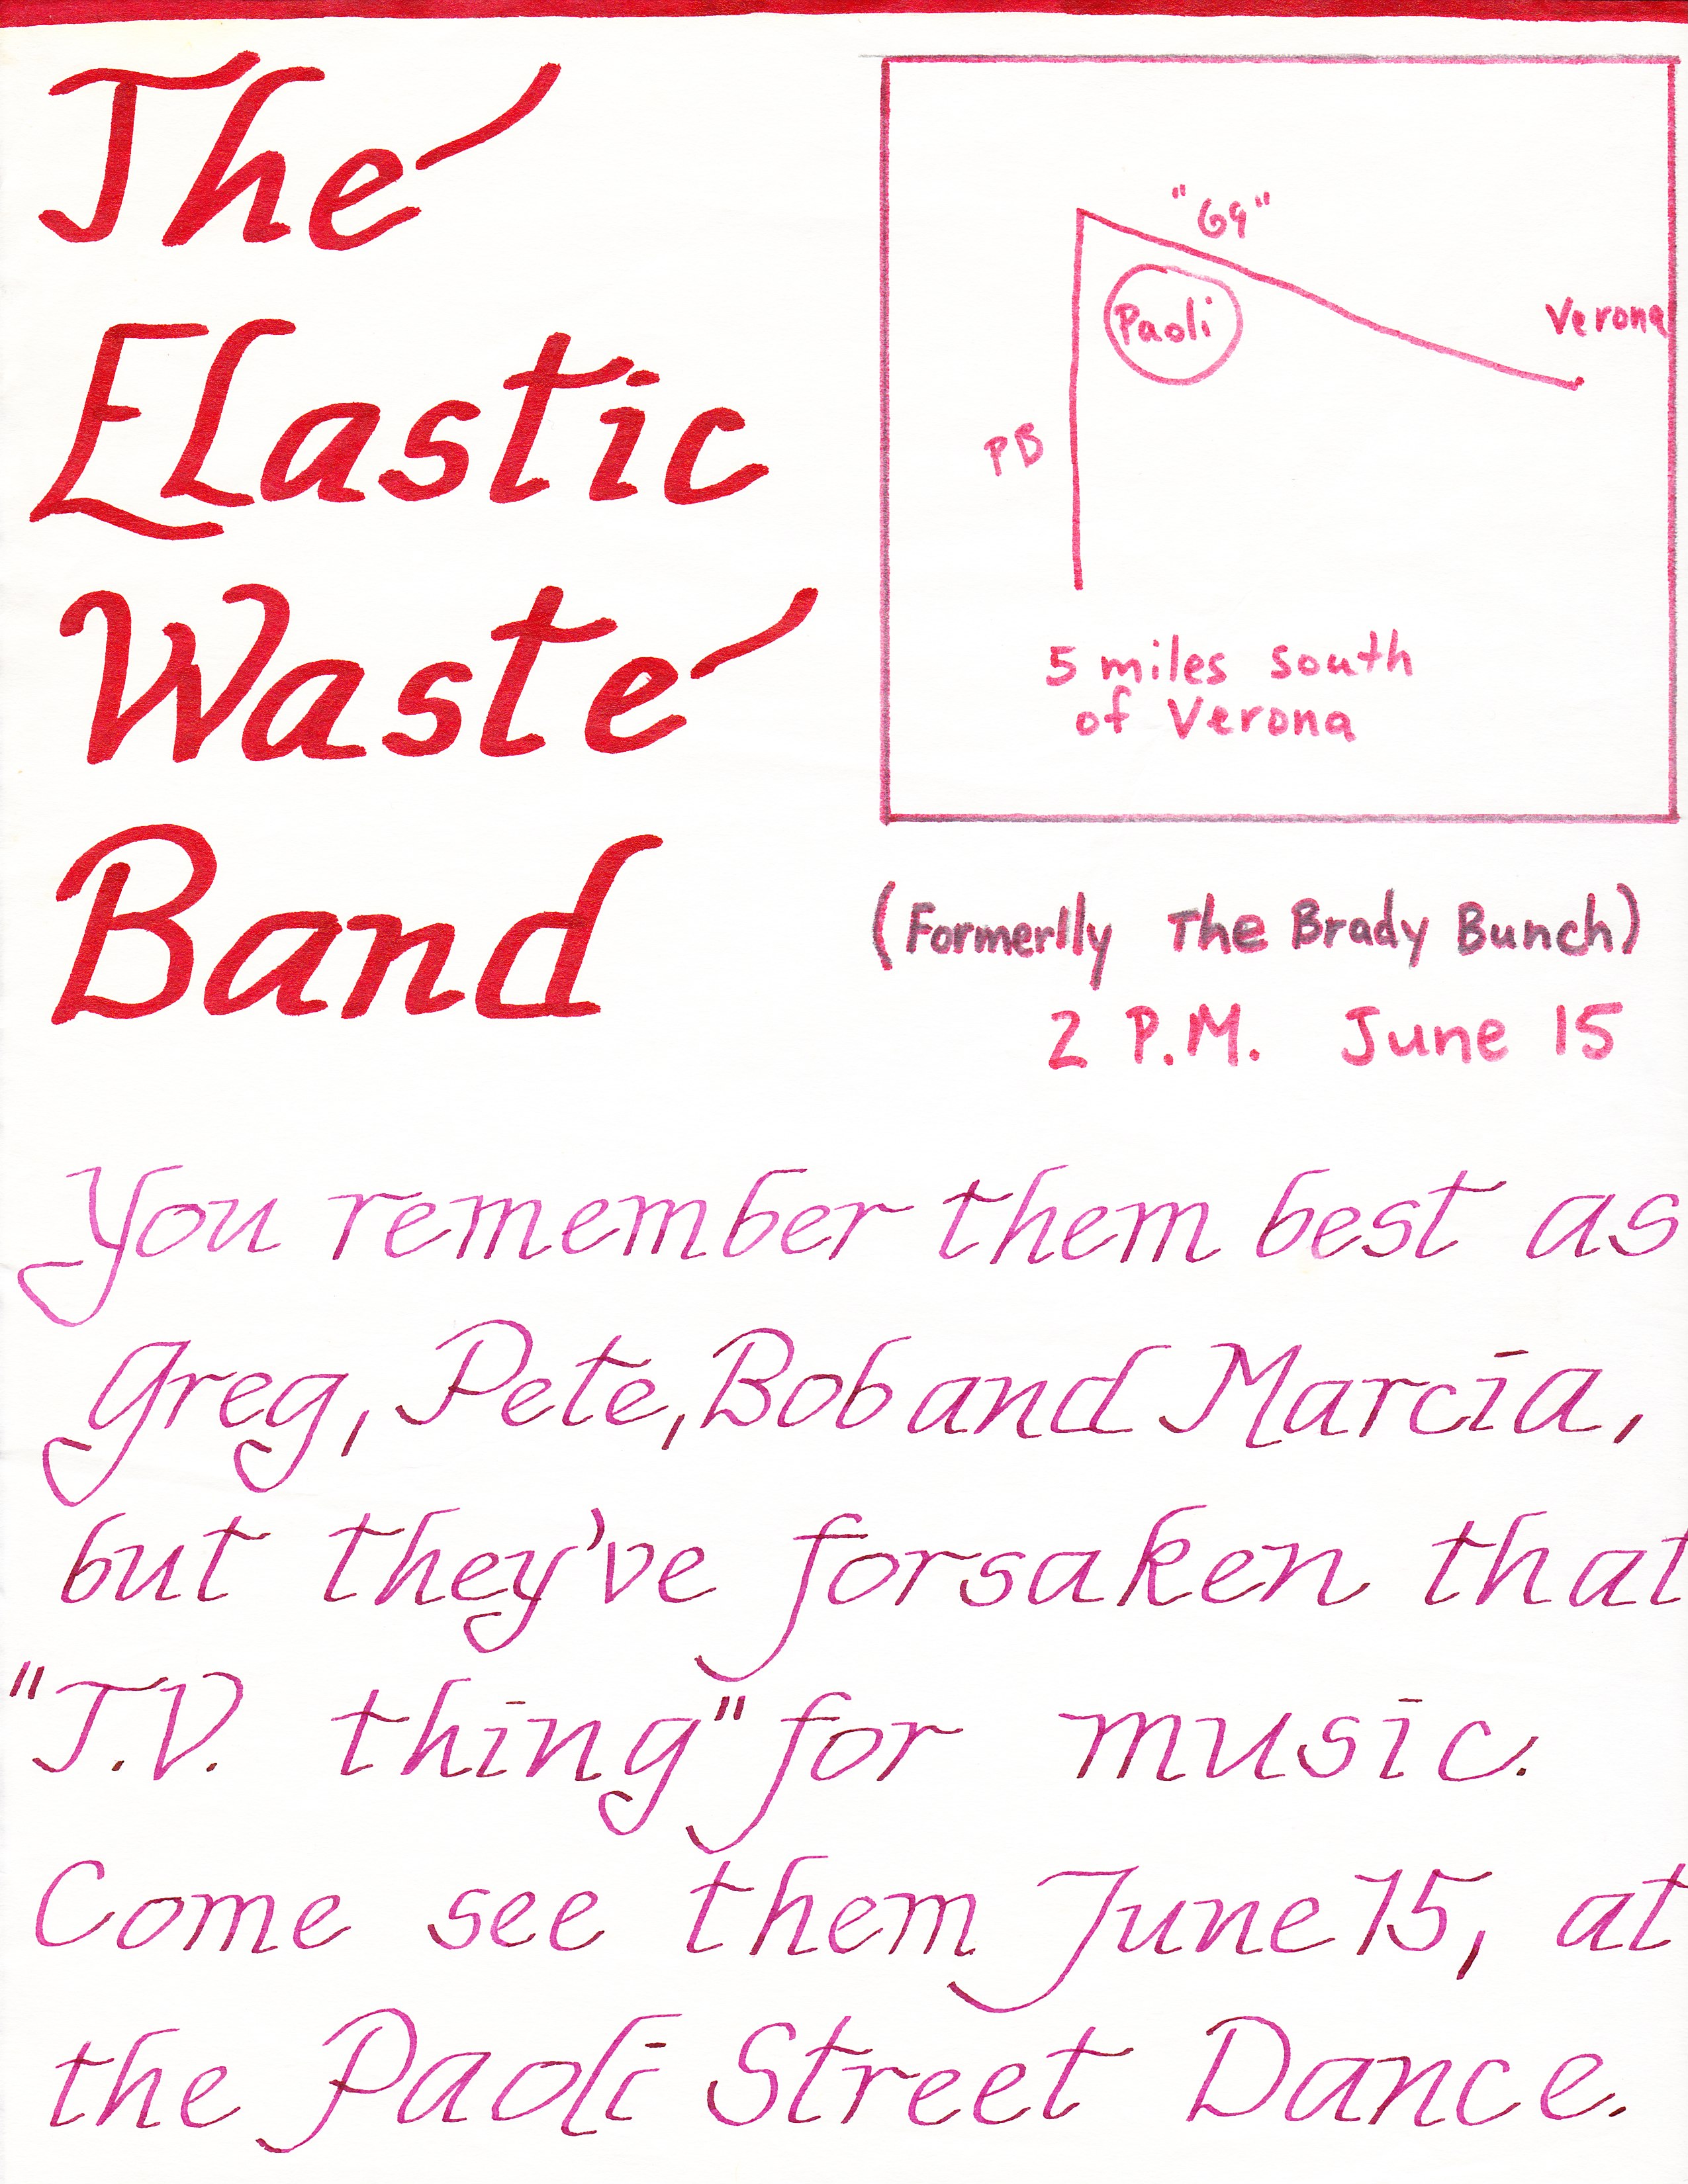 The Elastic Waste Band, June 15, 1985